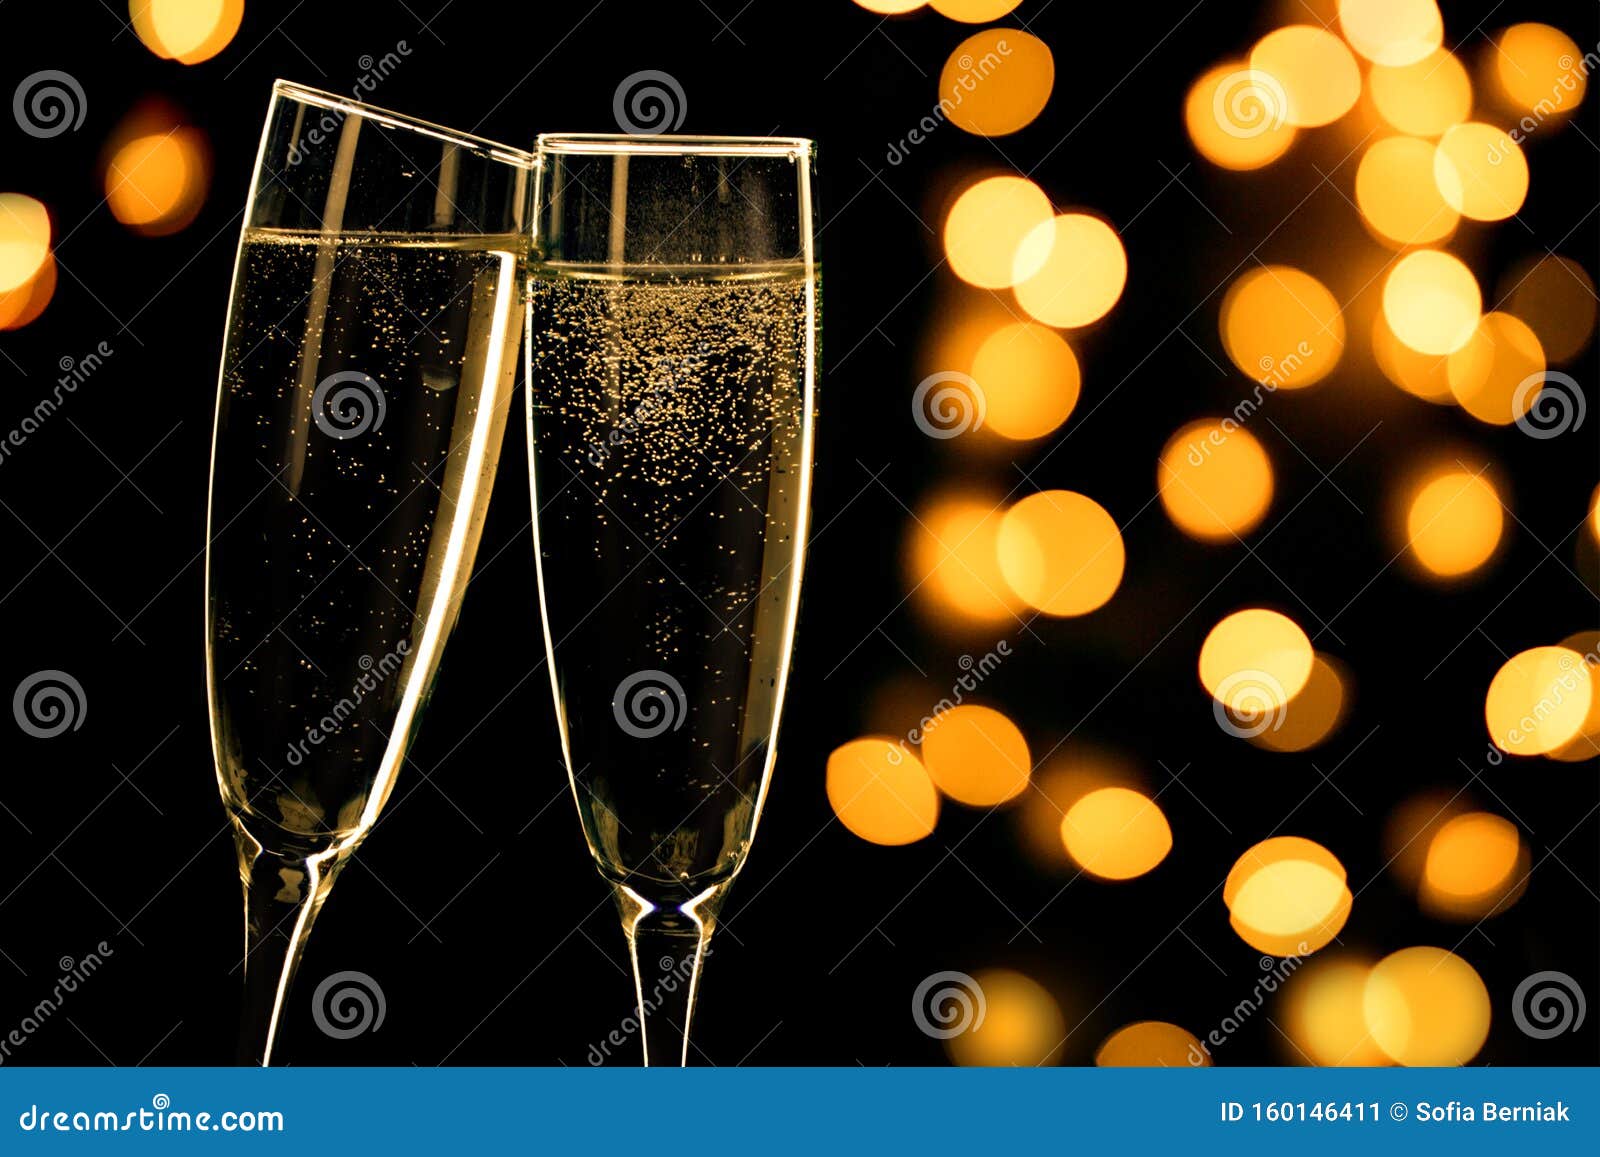 https://thumbs.dreamstime.com/z/two-champagne-glasses-toasting-black-background-bokeh-lights-happy-new-year-festive-concept-160146411.jpg